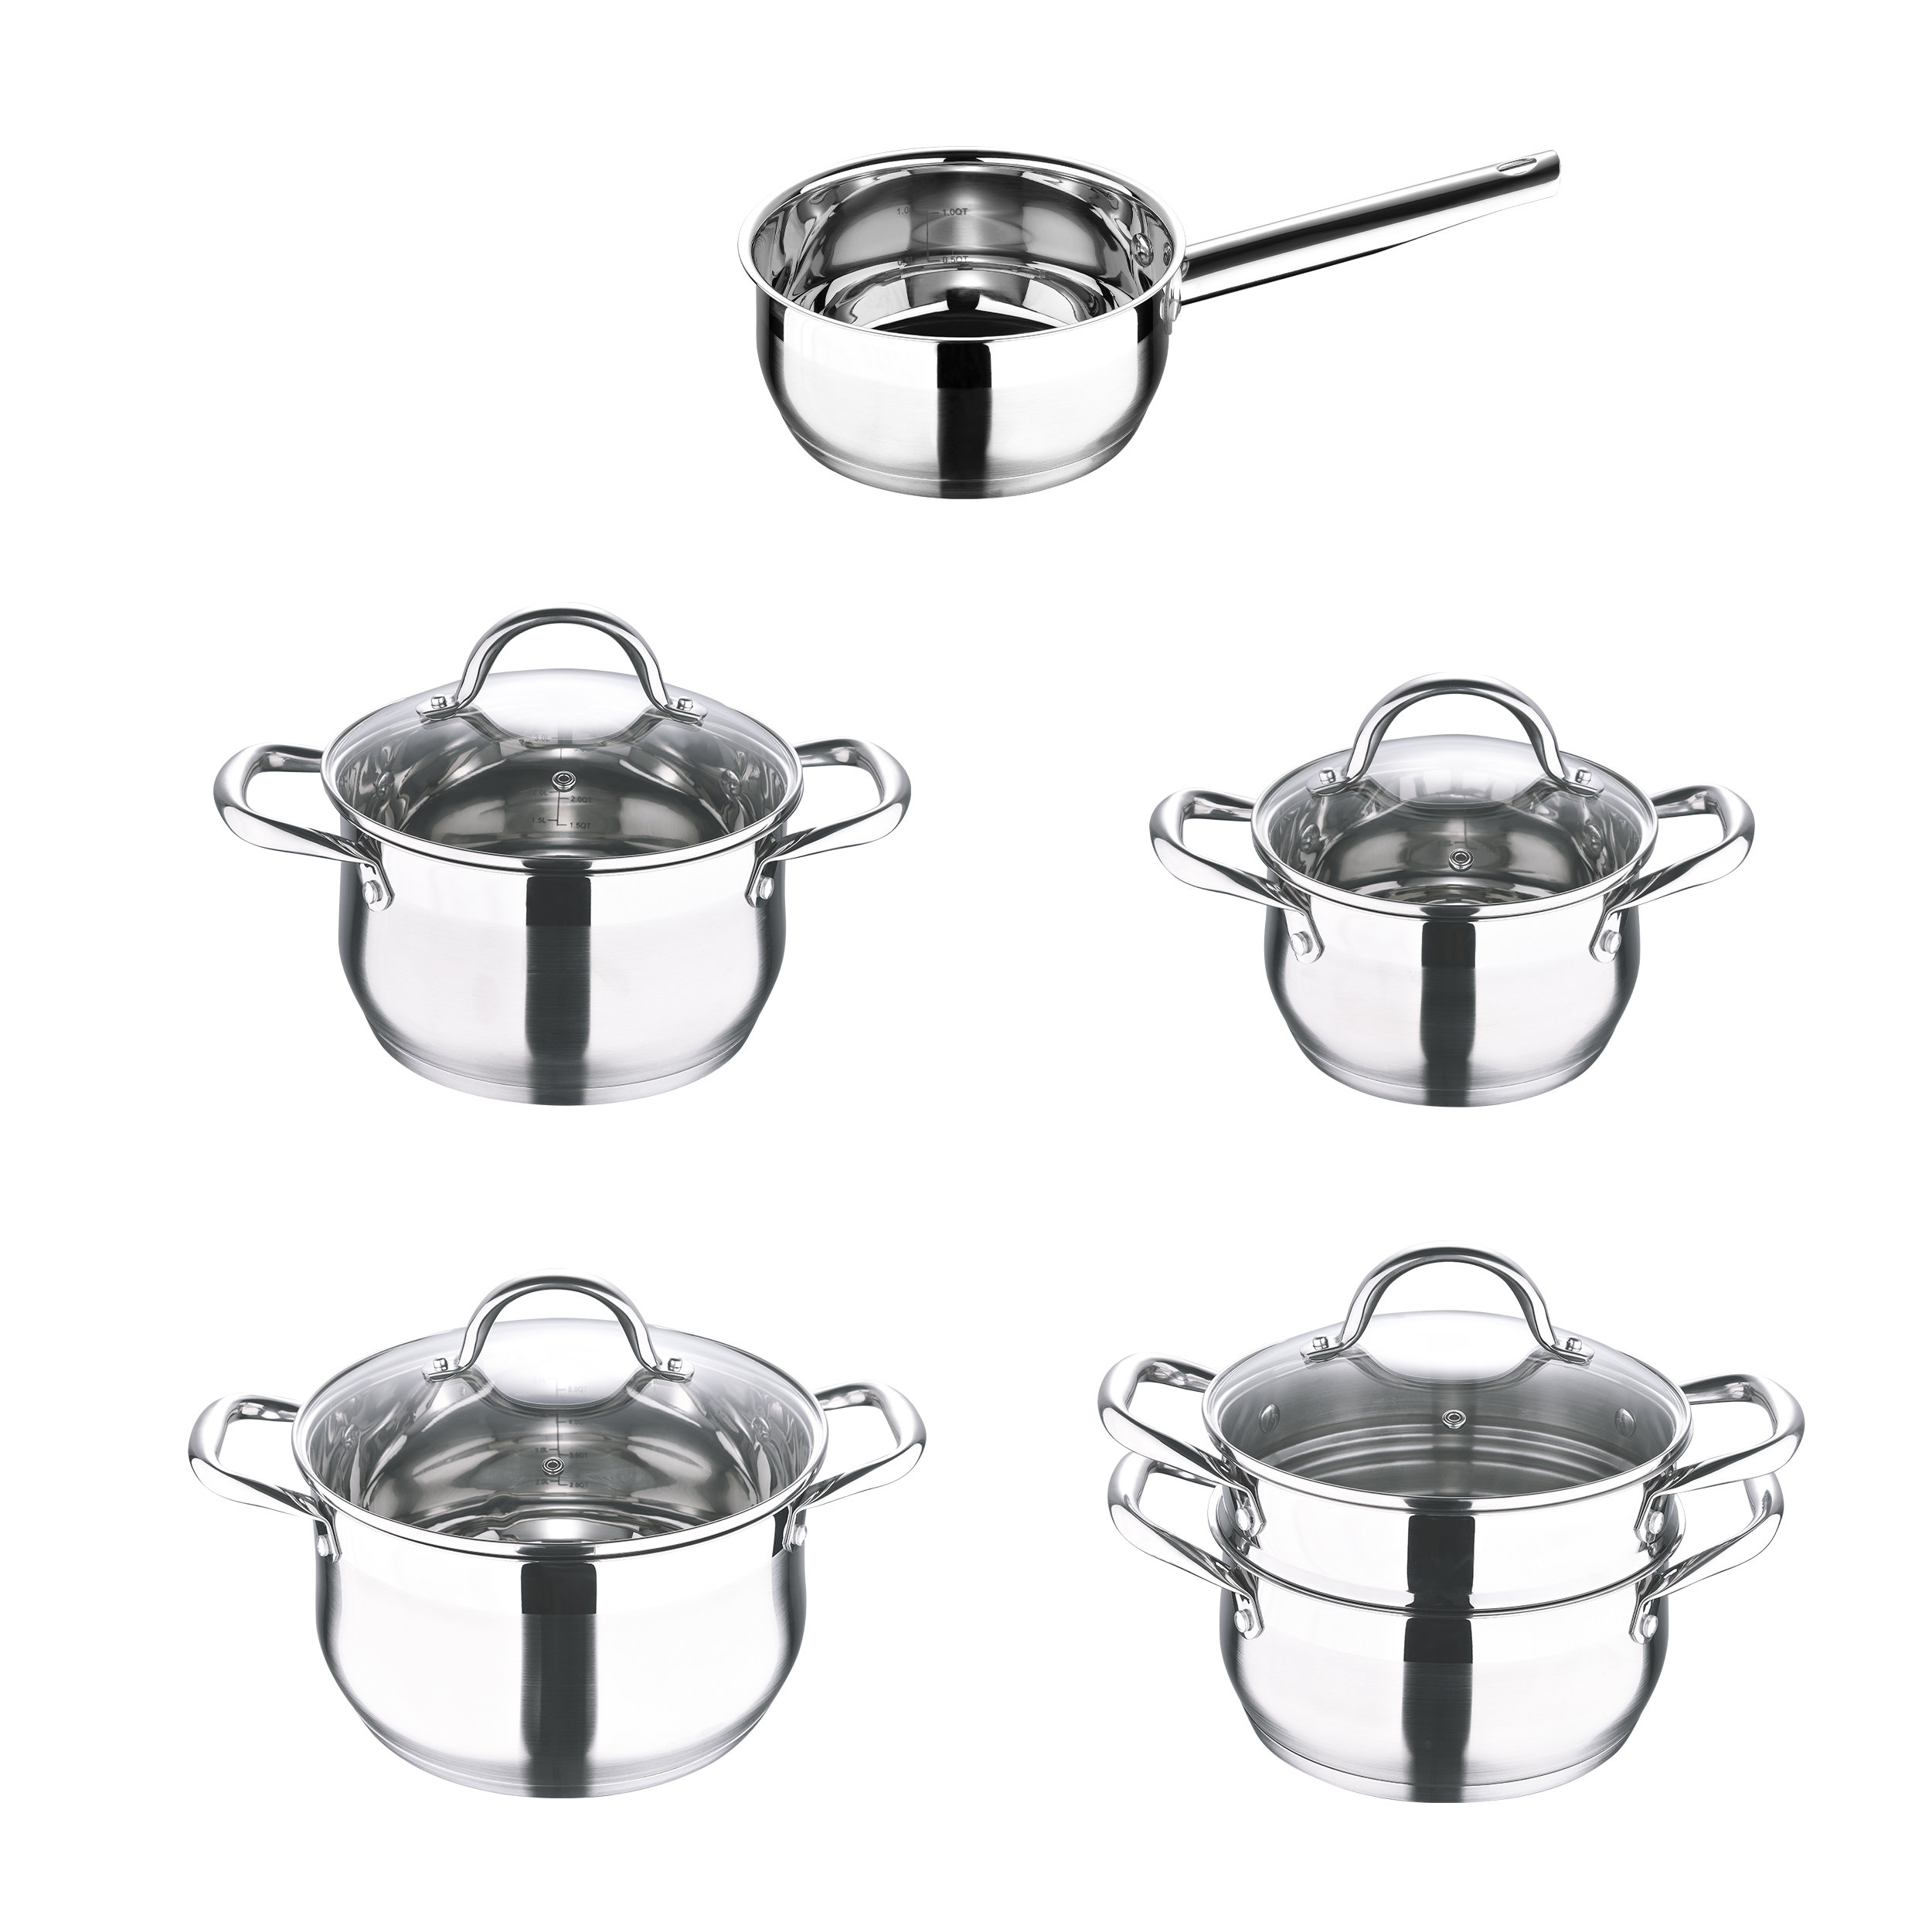 Bergner Essentials Stainless Steel Saucier Pot With Tempered Glass